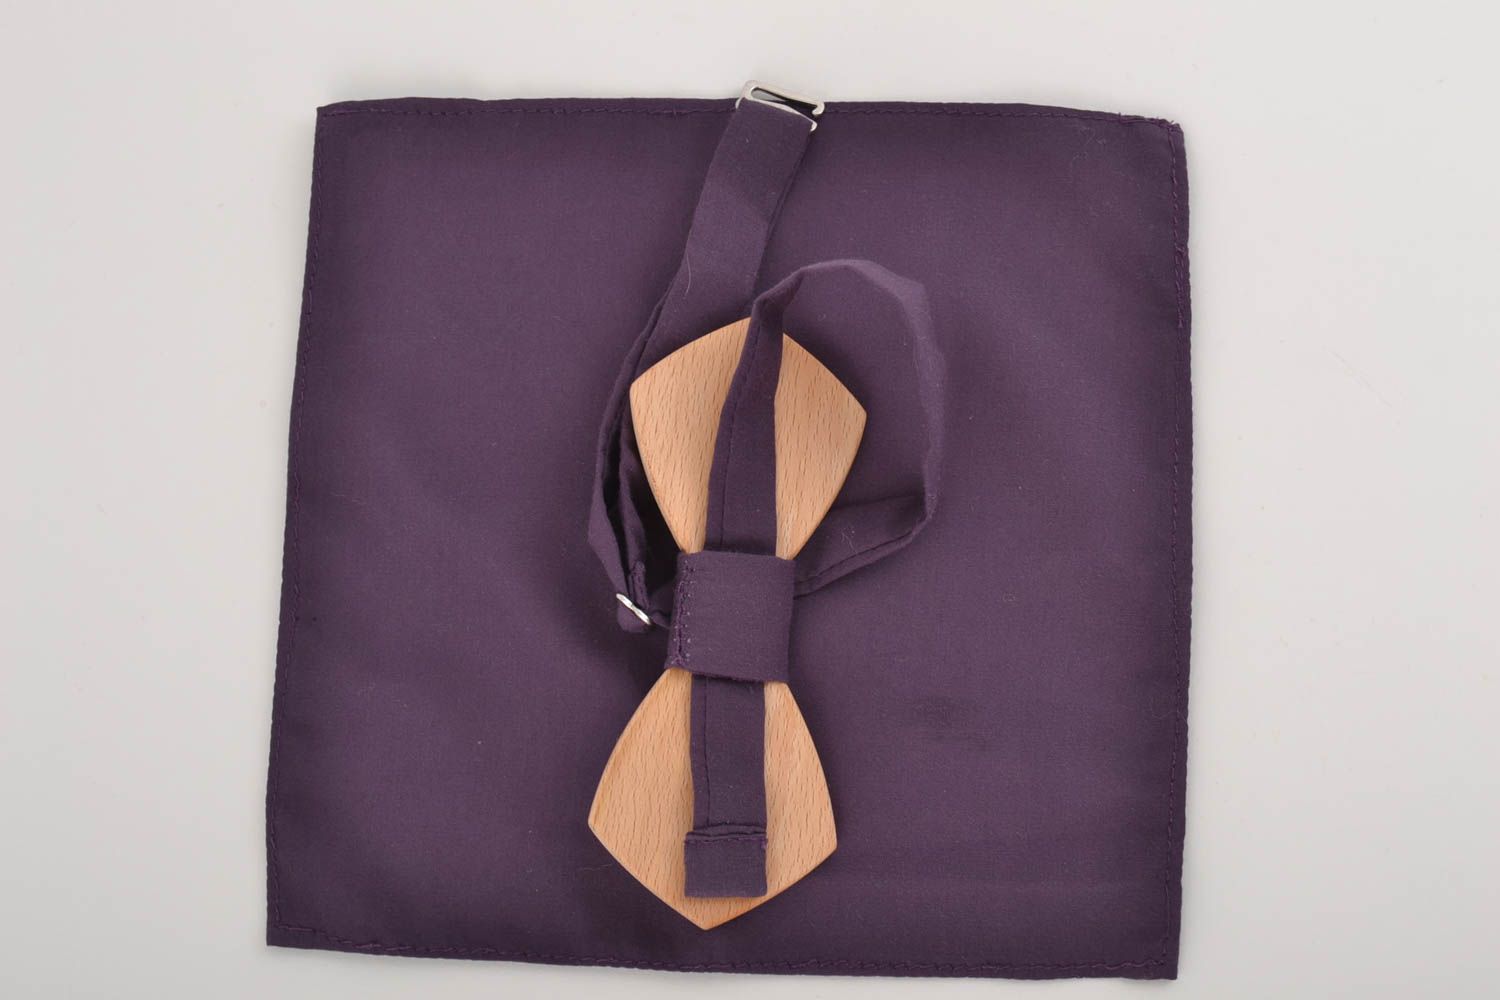 Beautiful handmade wooden bow tie cotton pocket square fashion trends gift ideas photo 2